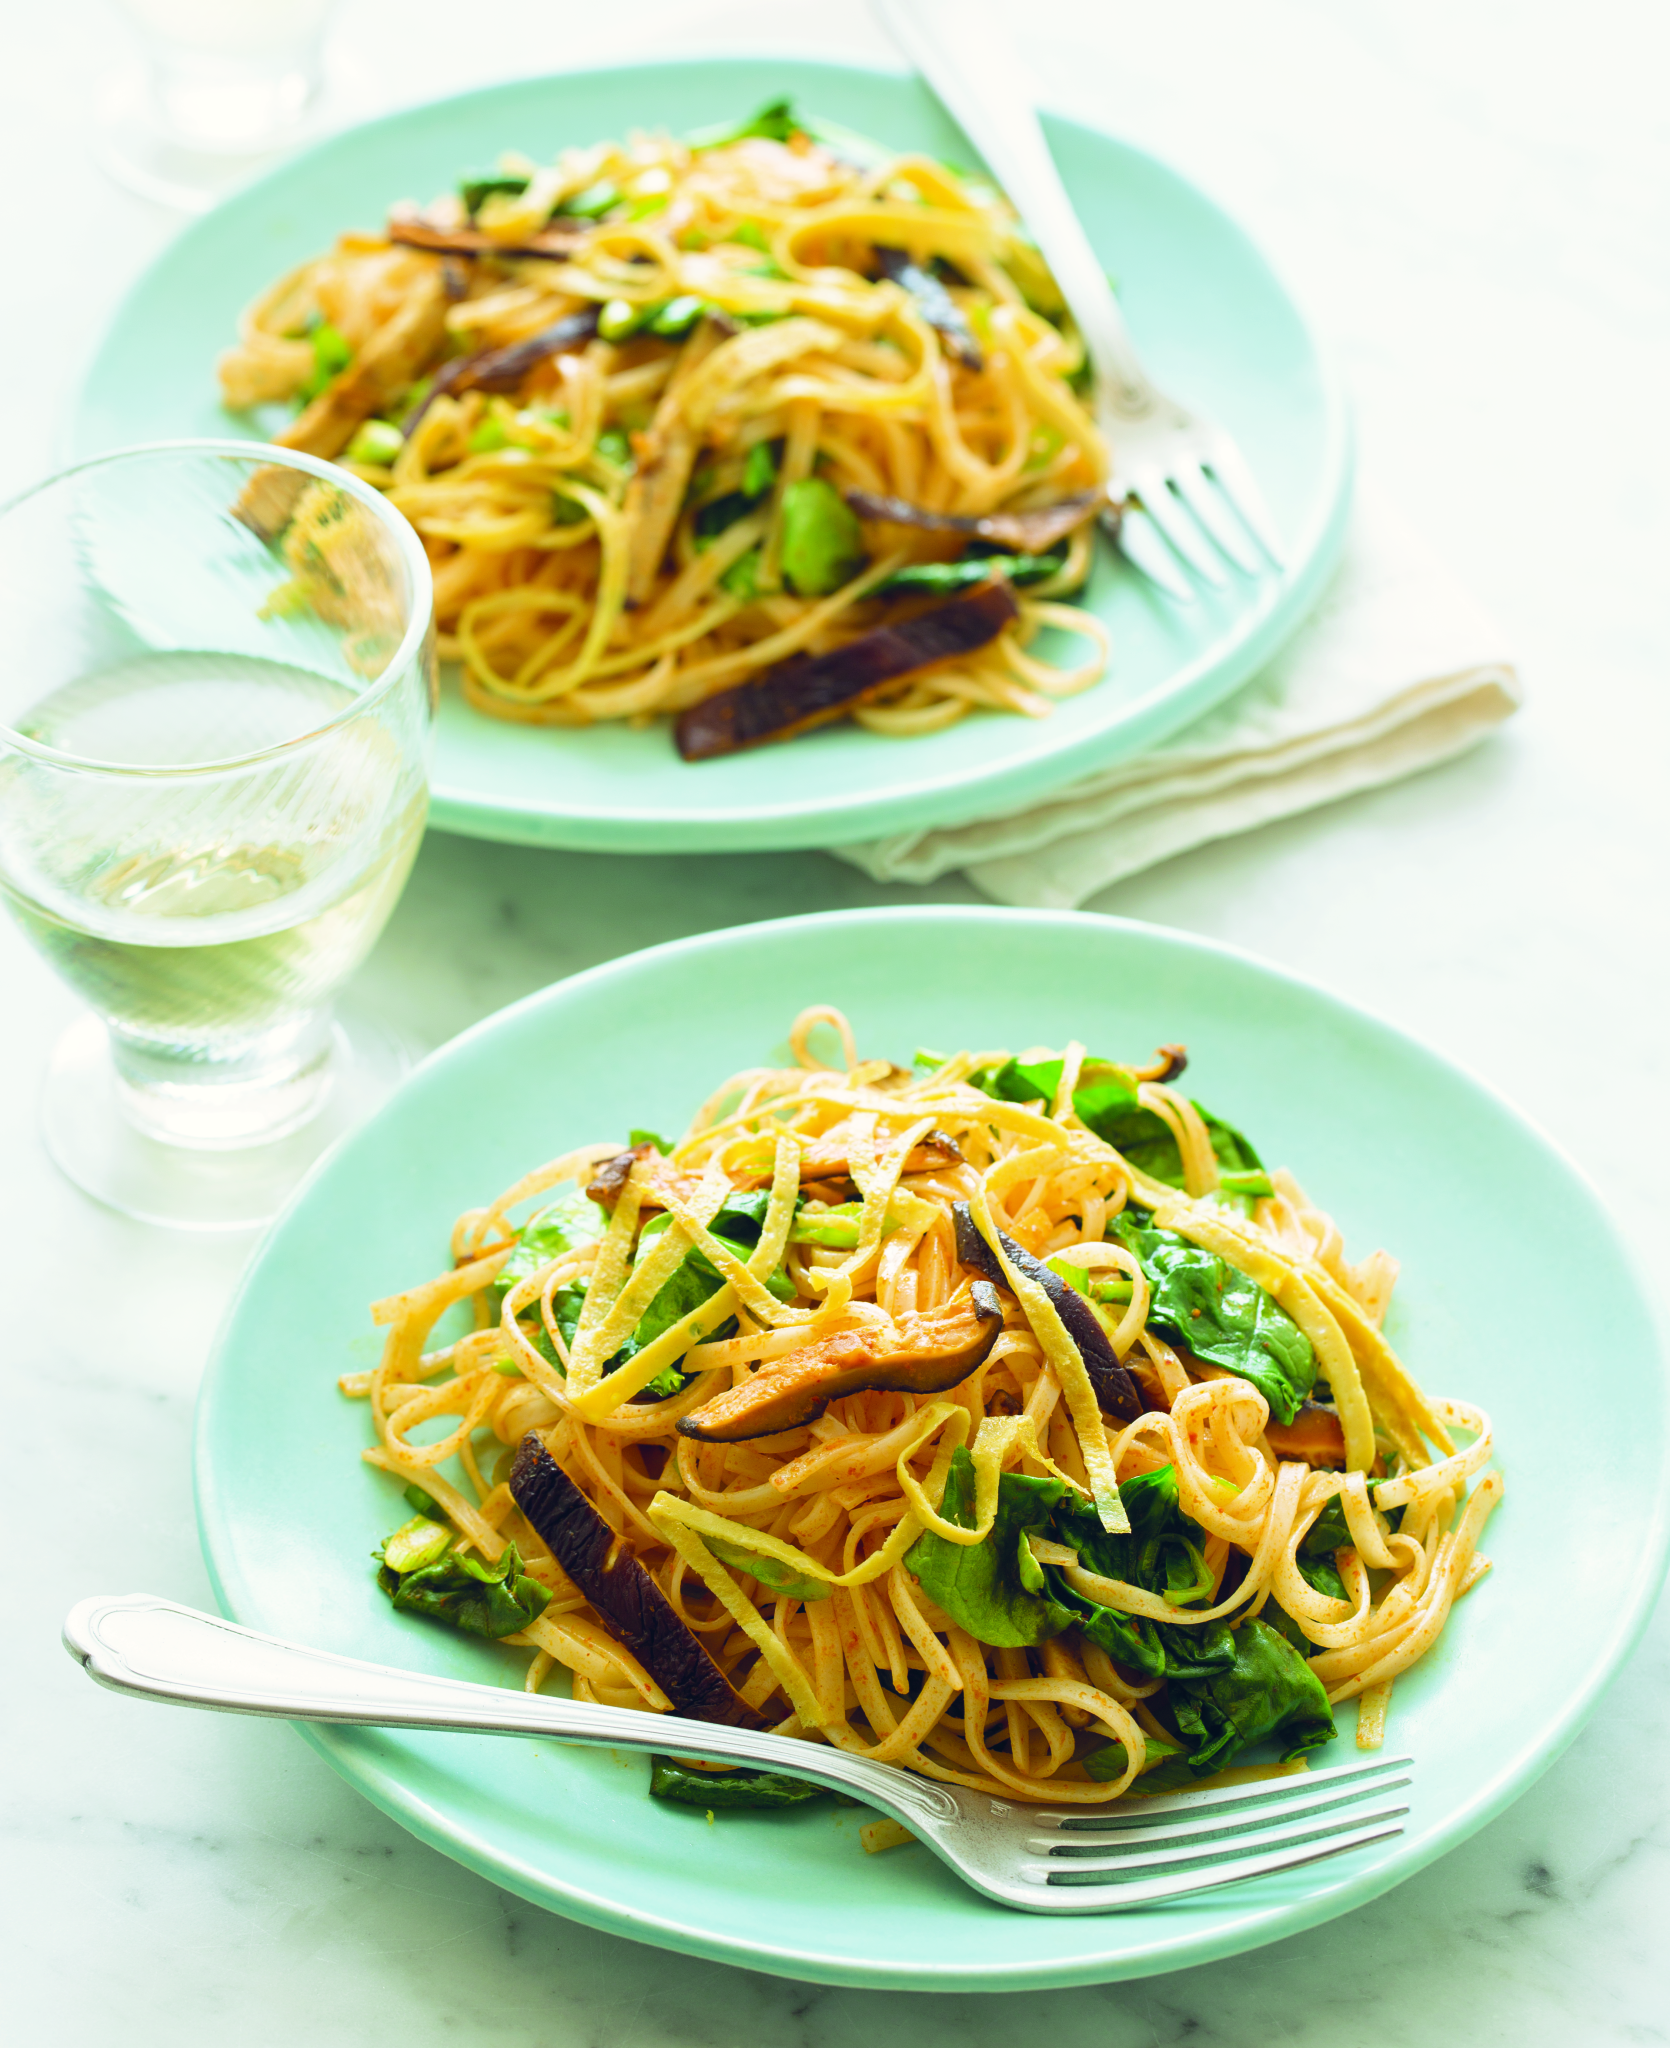 Thai Curried Rice Noodles With Dried Shiitake Mushrooms And Spinach